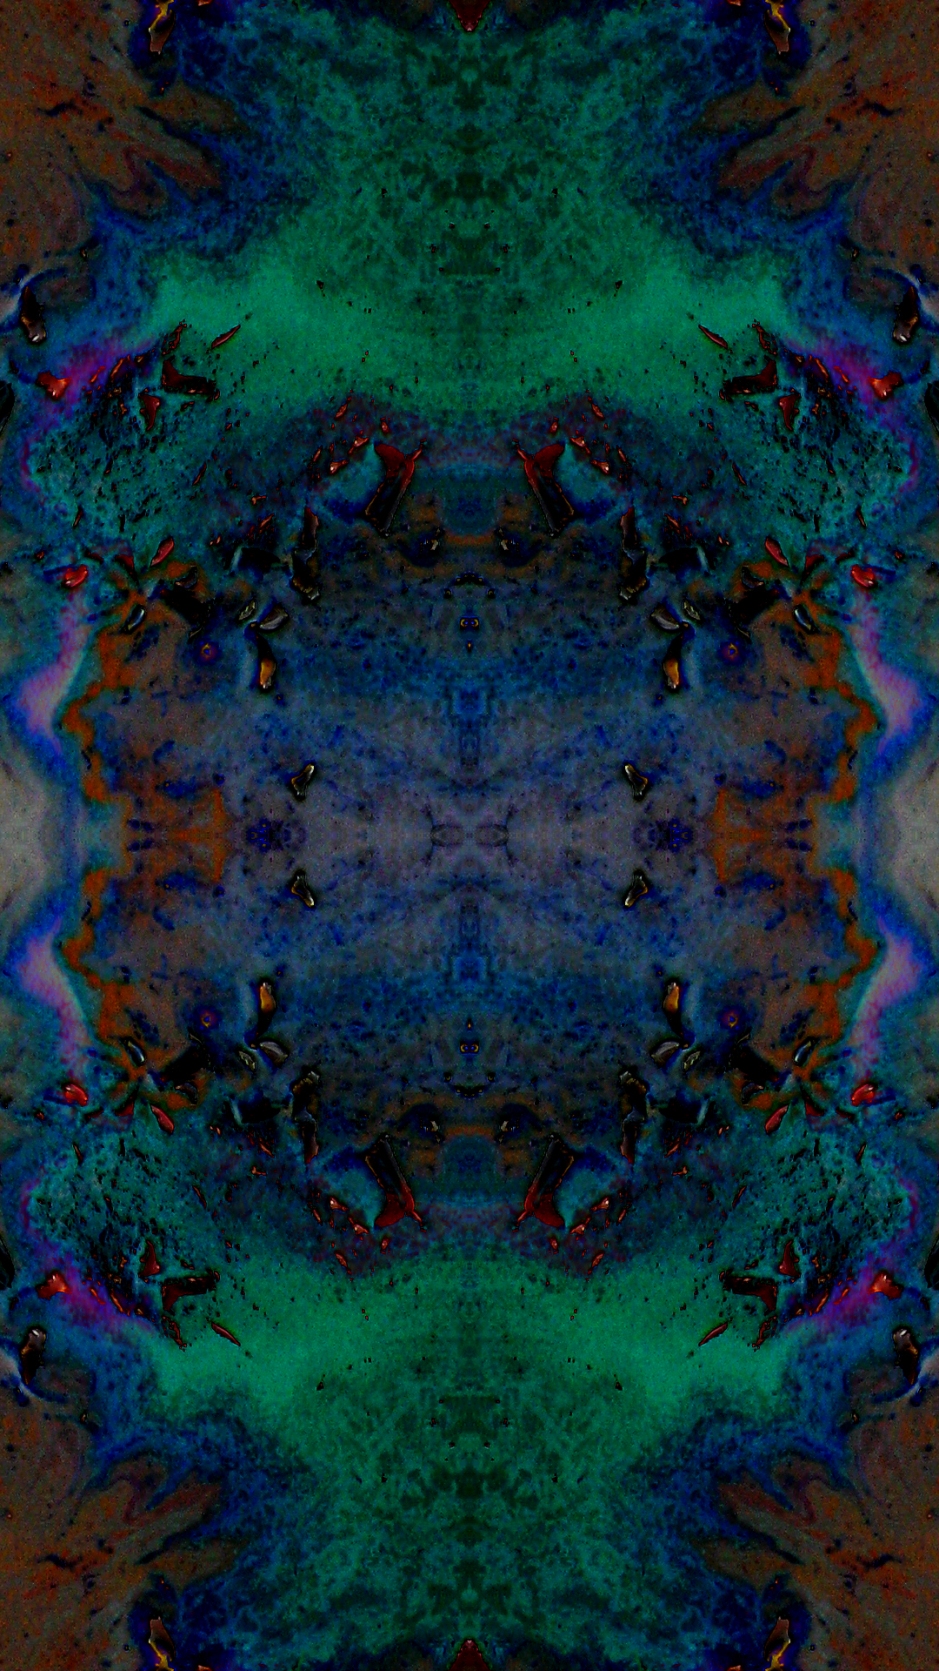 "UNTITLED 23" is a new psychedelic art work dominated by higher chakra colors in an effort to elevate my mind out of the gutter. Results are not established yet. Sacred Square Art and Design. ©2013